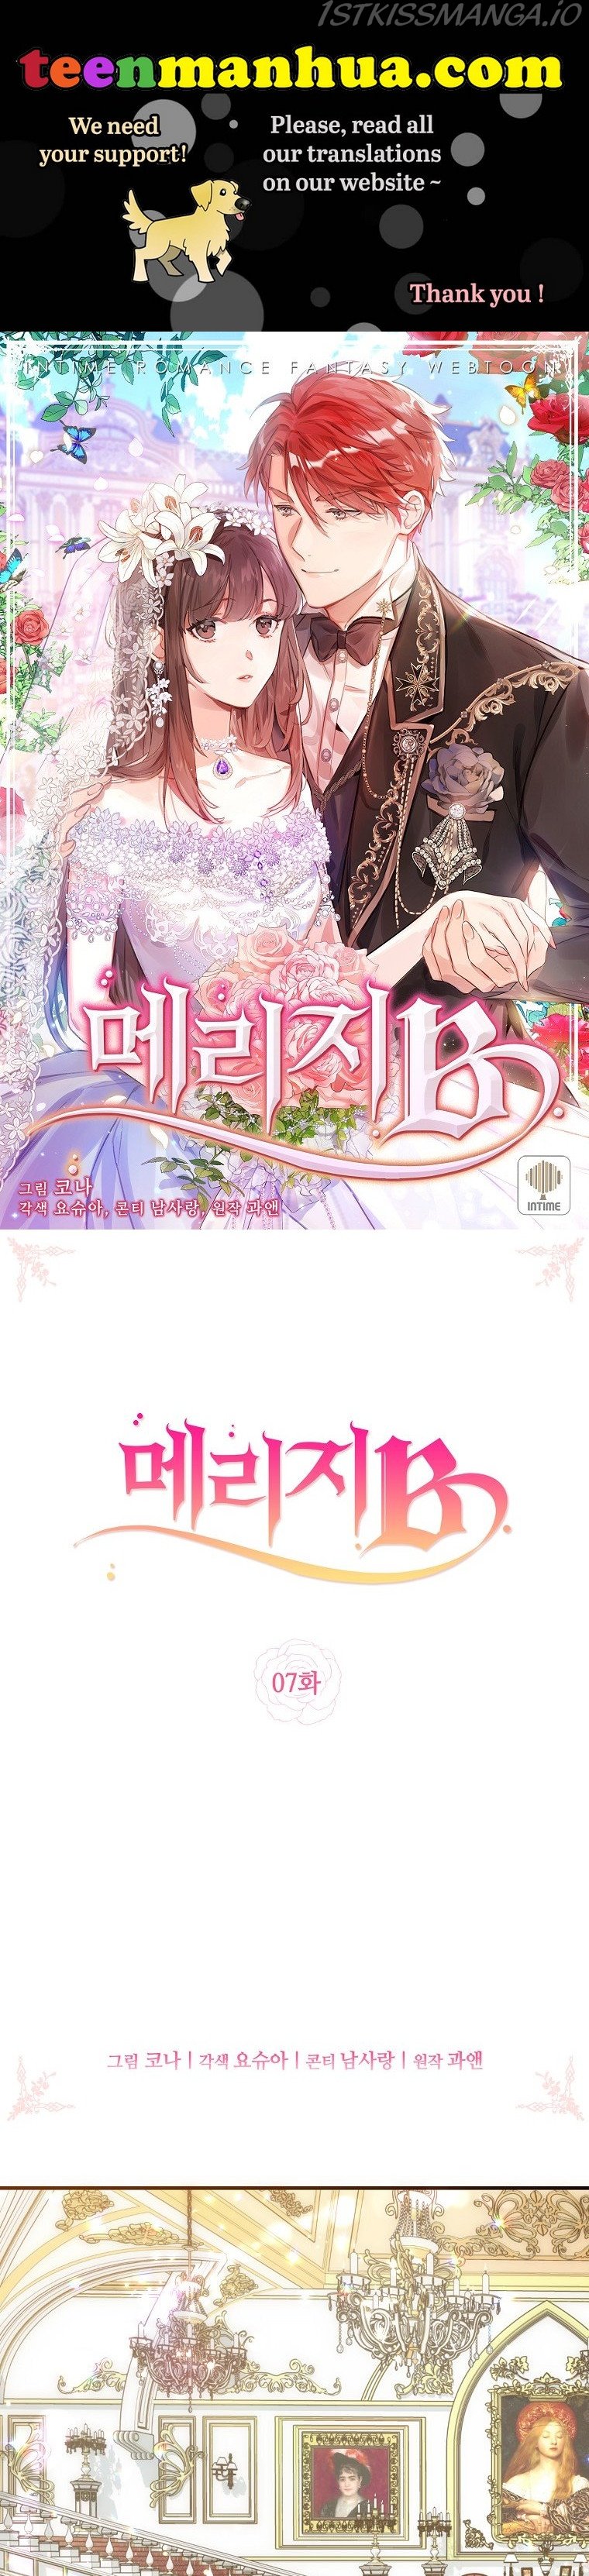 Marriage B chapter 7